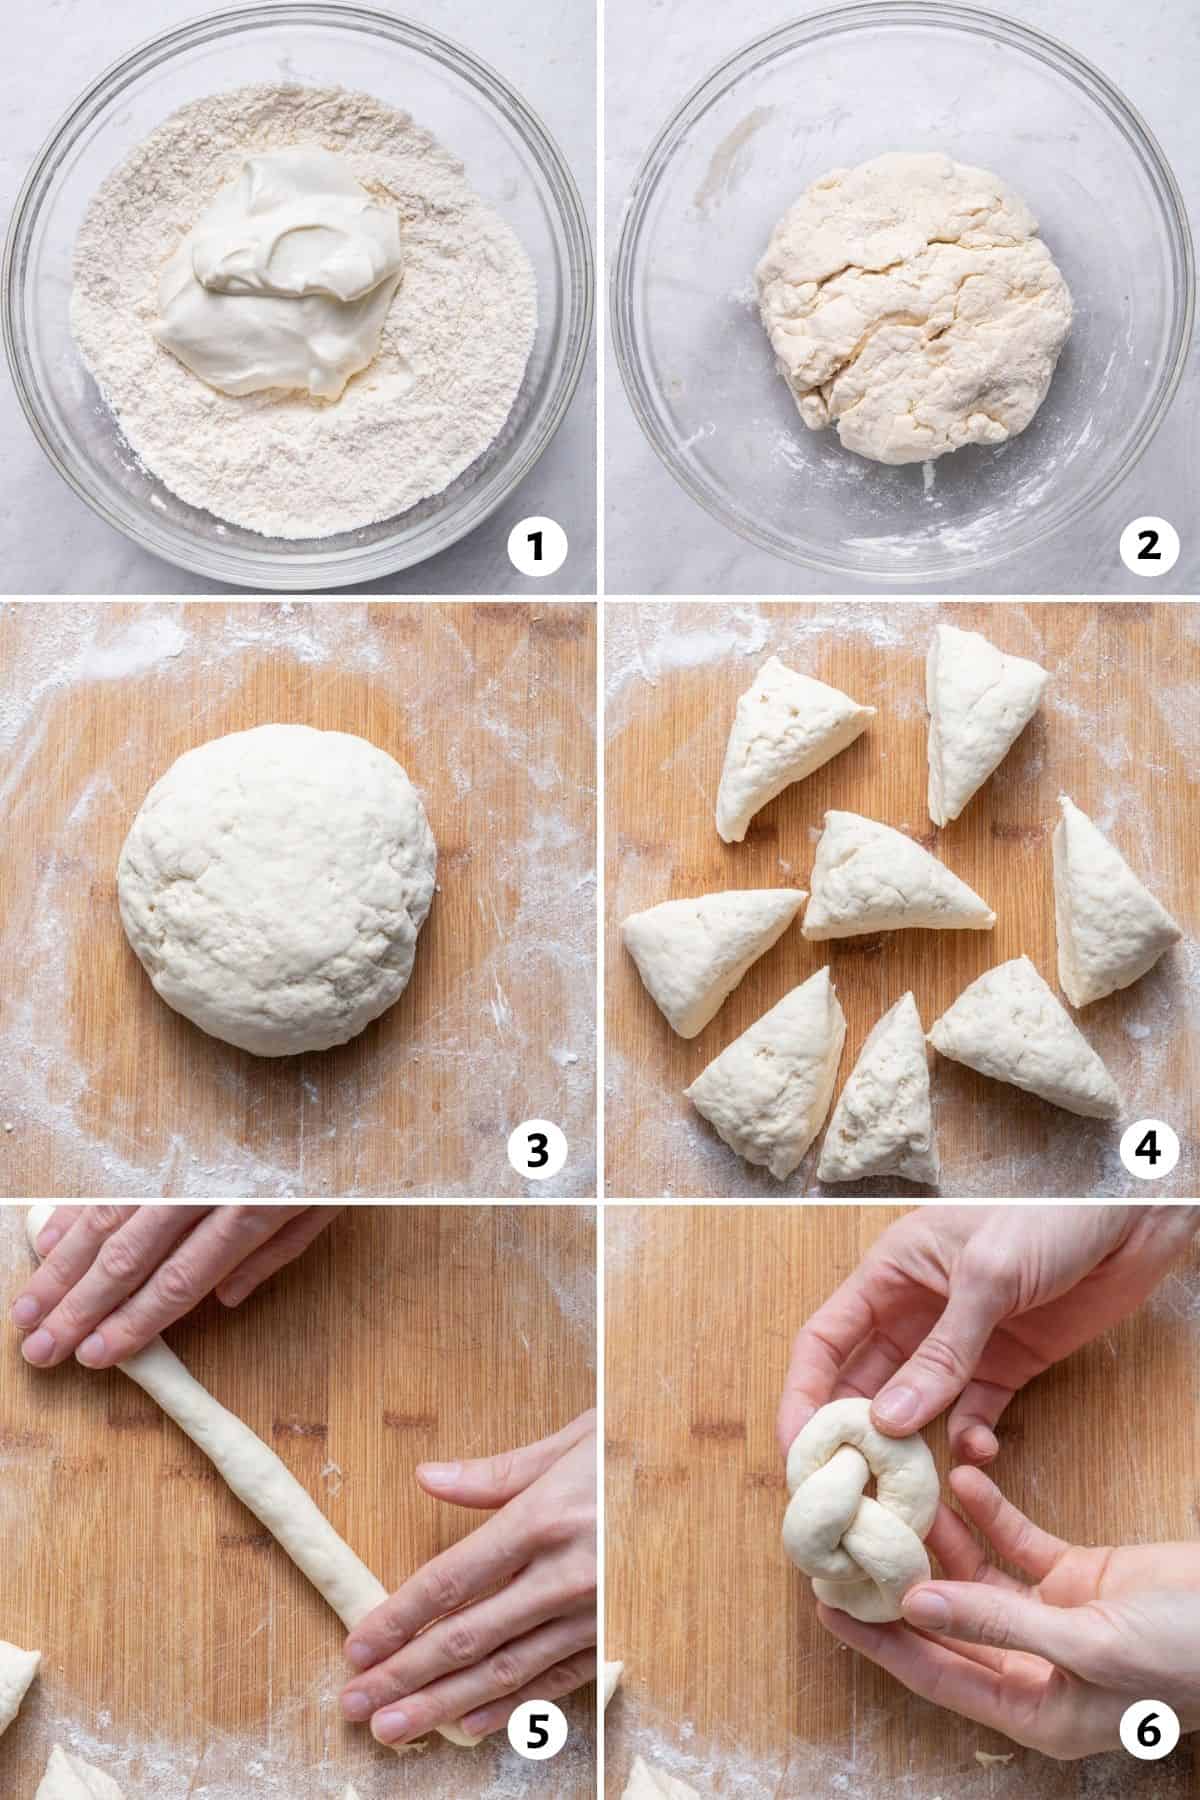 6 image collage to show how to mix the dough, knead, roll and shape it